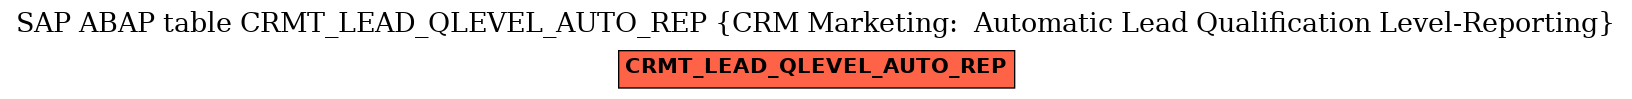 E-R Diagram for table CRMT_LEAD_QLEVEL_AUTO_REP (CRM Marketing:  Automatic Lead Qualification Level-Reporting)